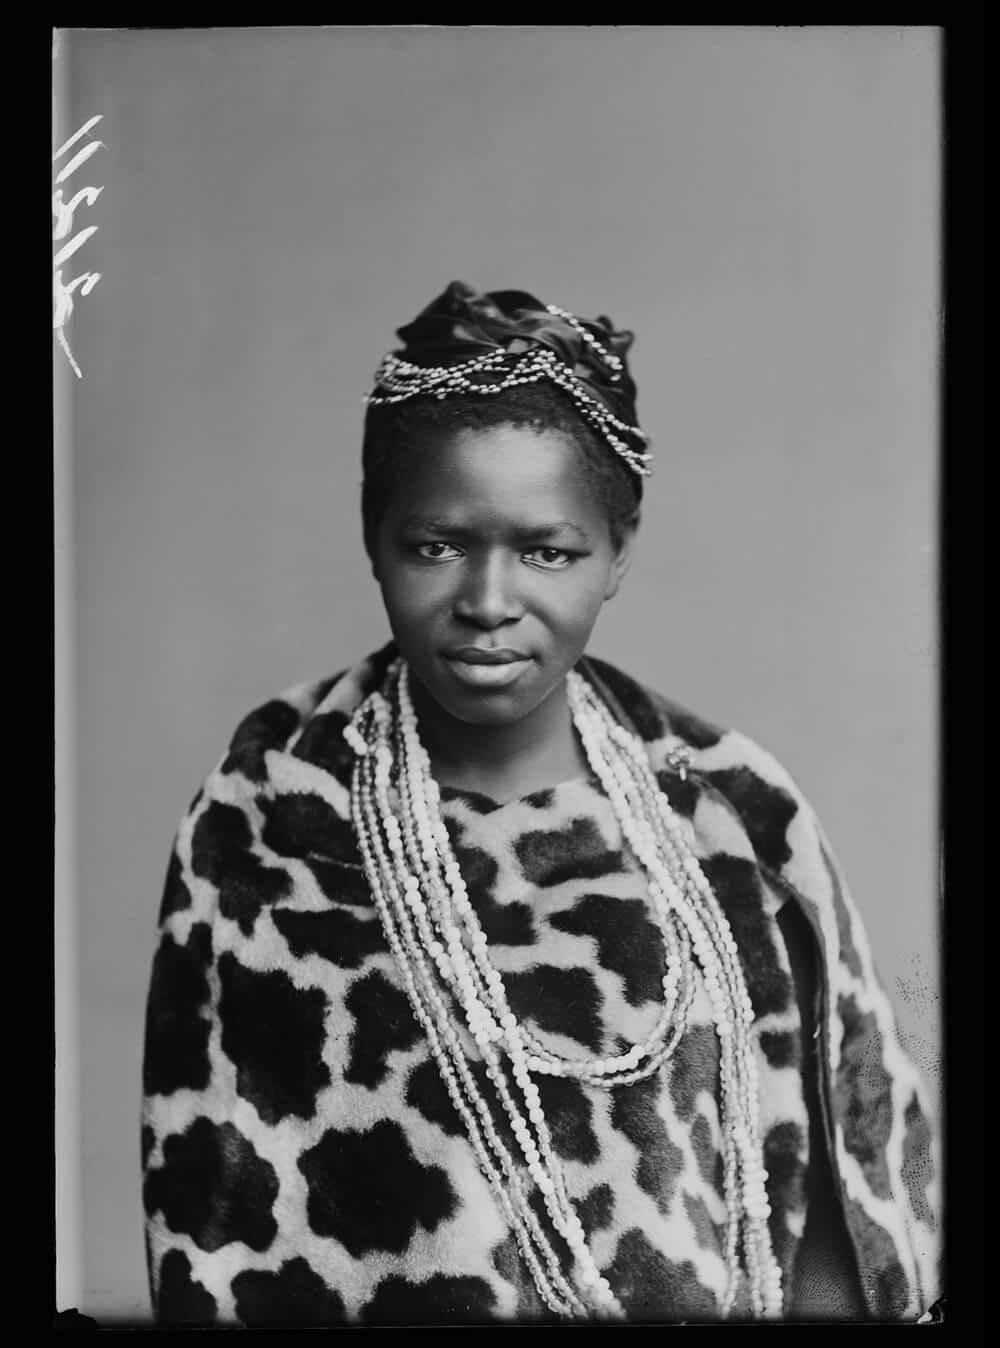 Charlotte Maxeke (née Manye), The African Choir. London, 1891. By London Stereoscopic Company. © Hulton Archive/Getty Images. Courtesy of Hulton Archive, and Autograph ABP, London.